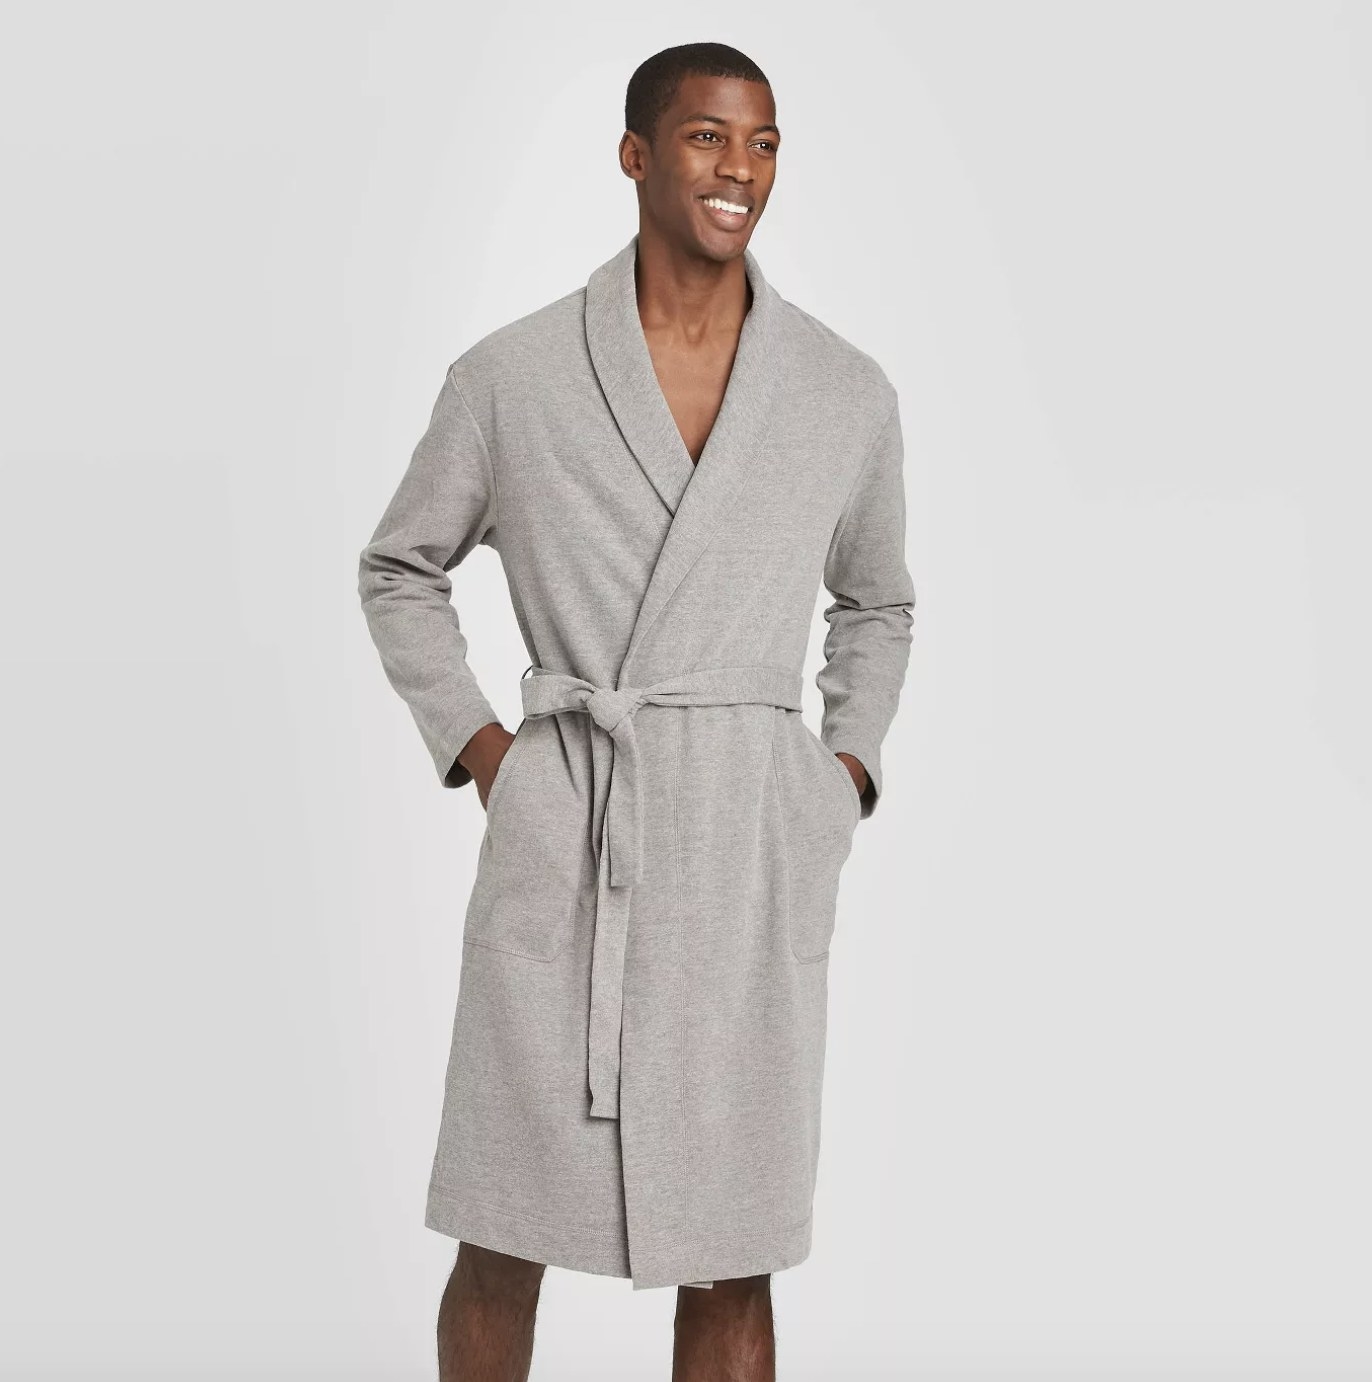 An adult is wearing a grey terry robe